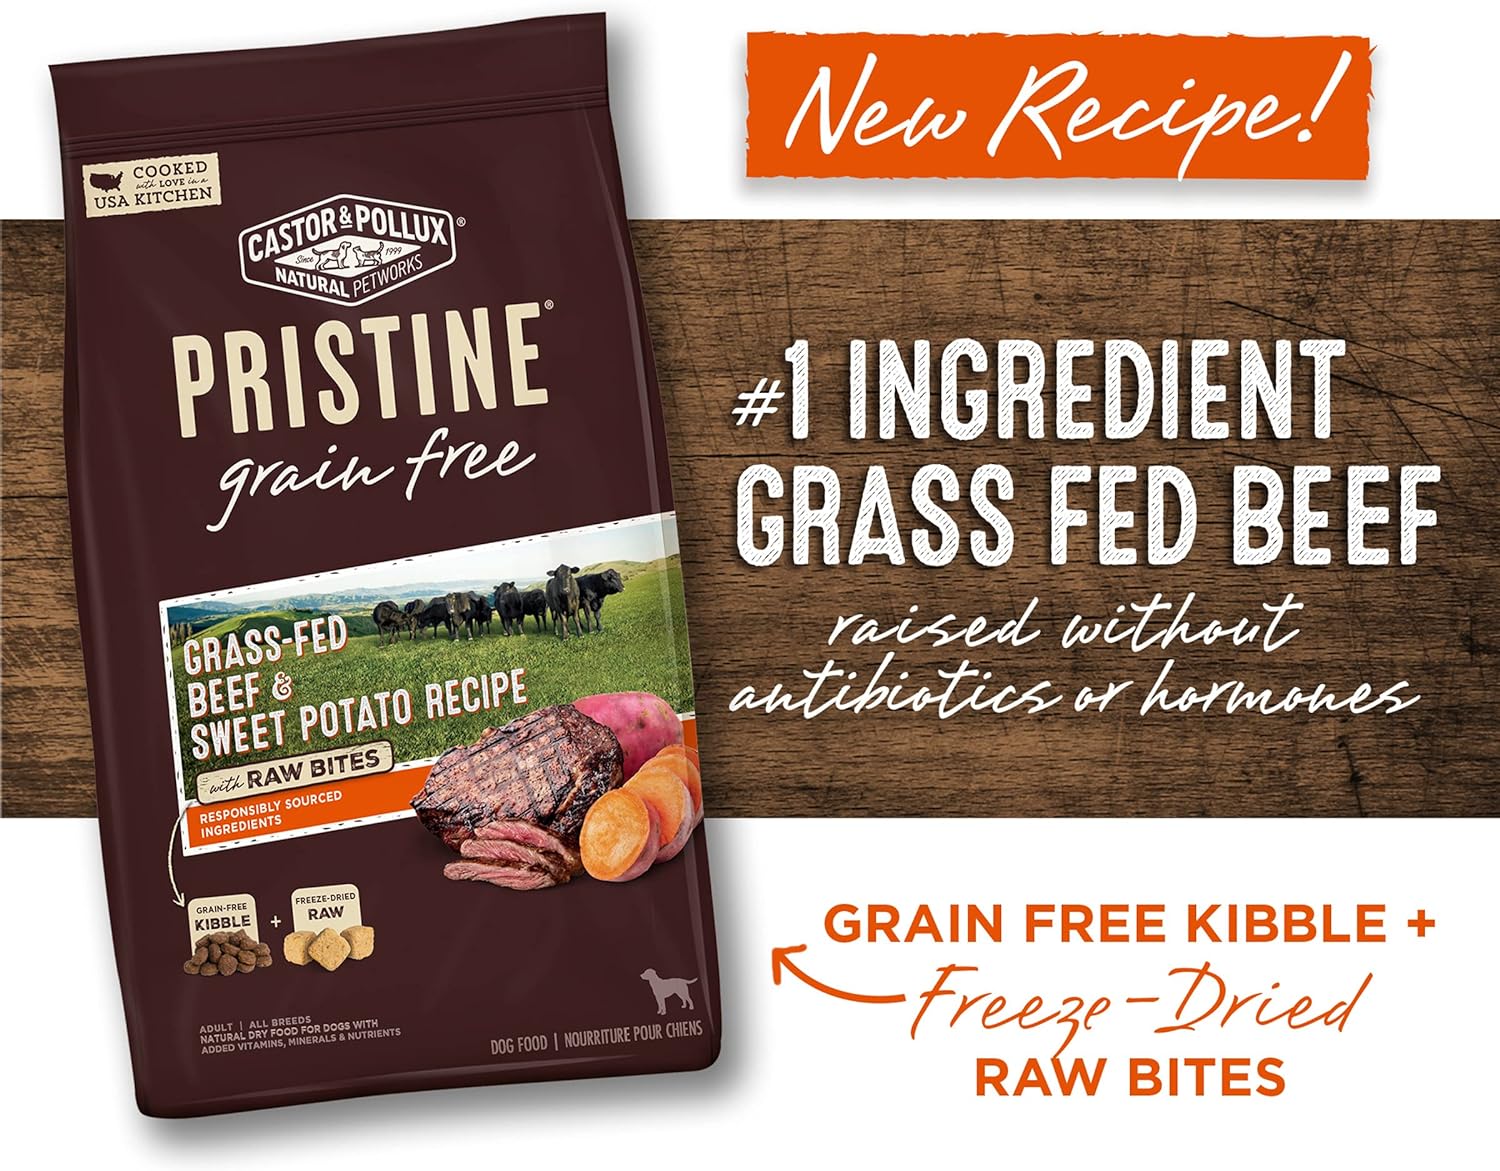 Castor & Pollux Pristine Grain-Free Grass-Fed Beef & Sweet Potato Recipe with Raw Bites Dry Dog Food – Gallery Image 2